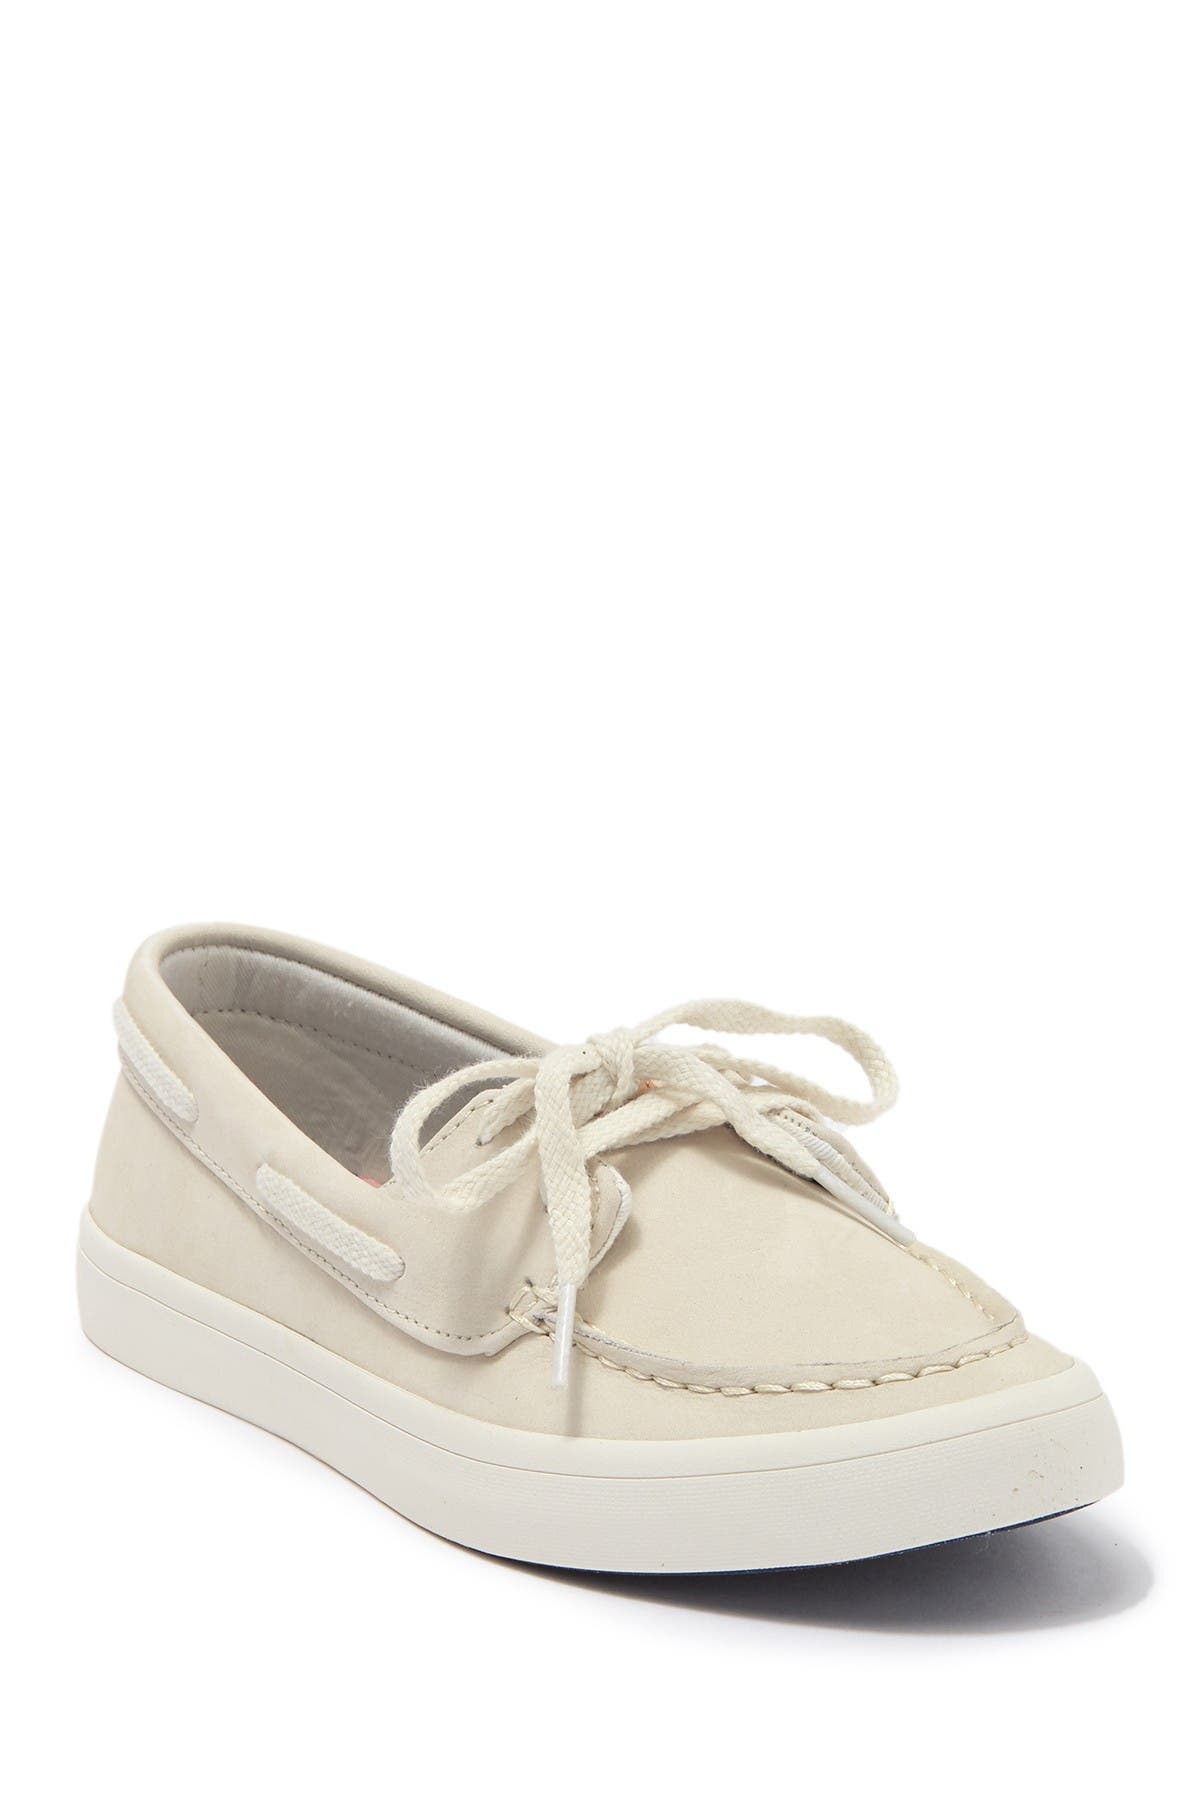 sailor boat sperry